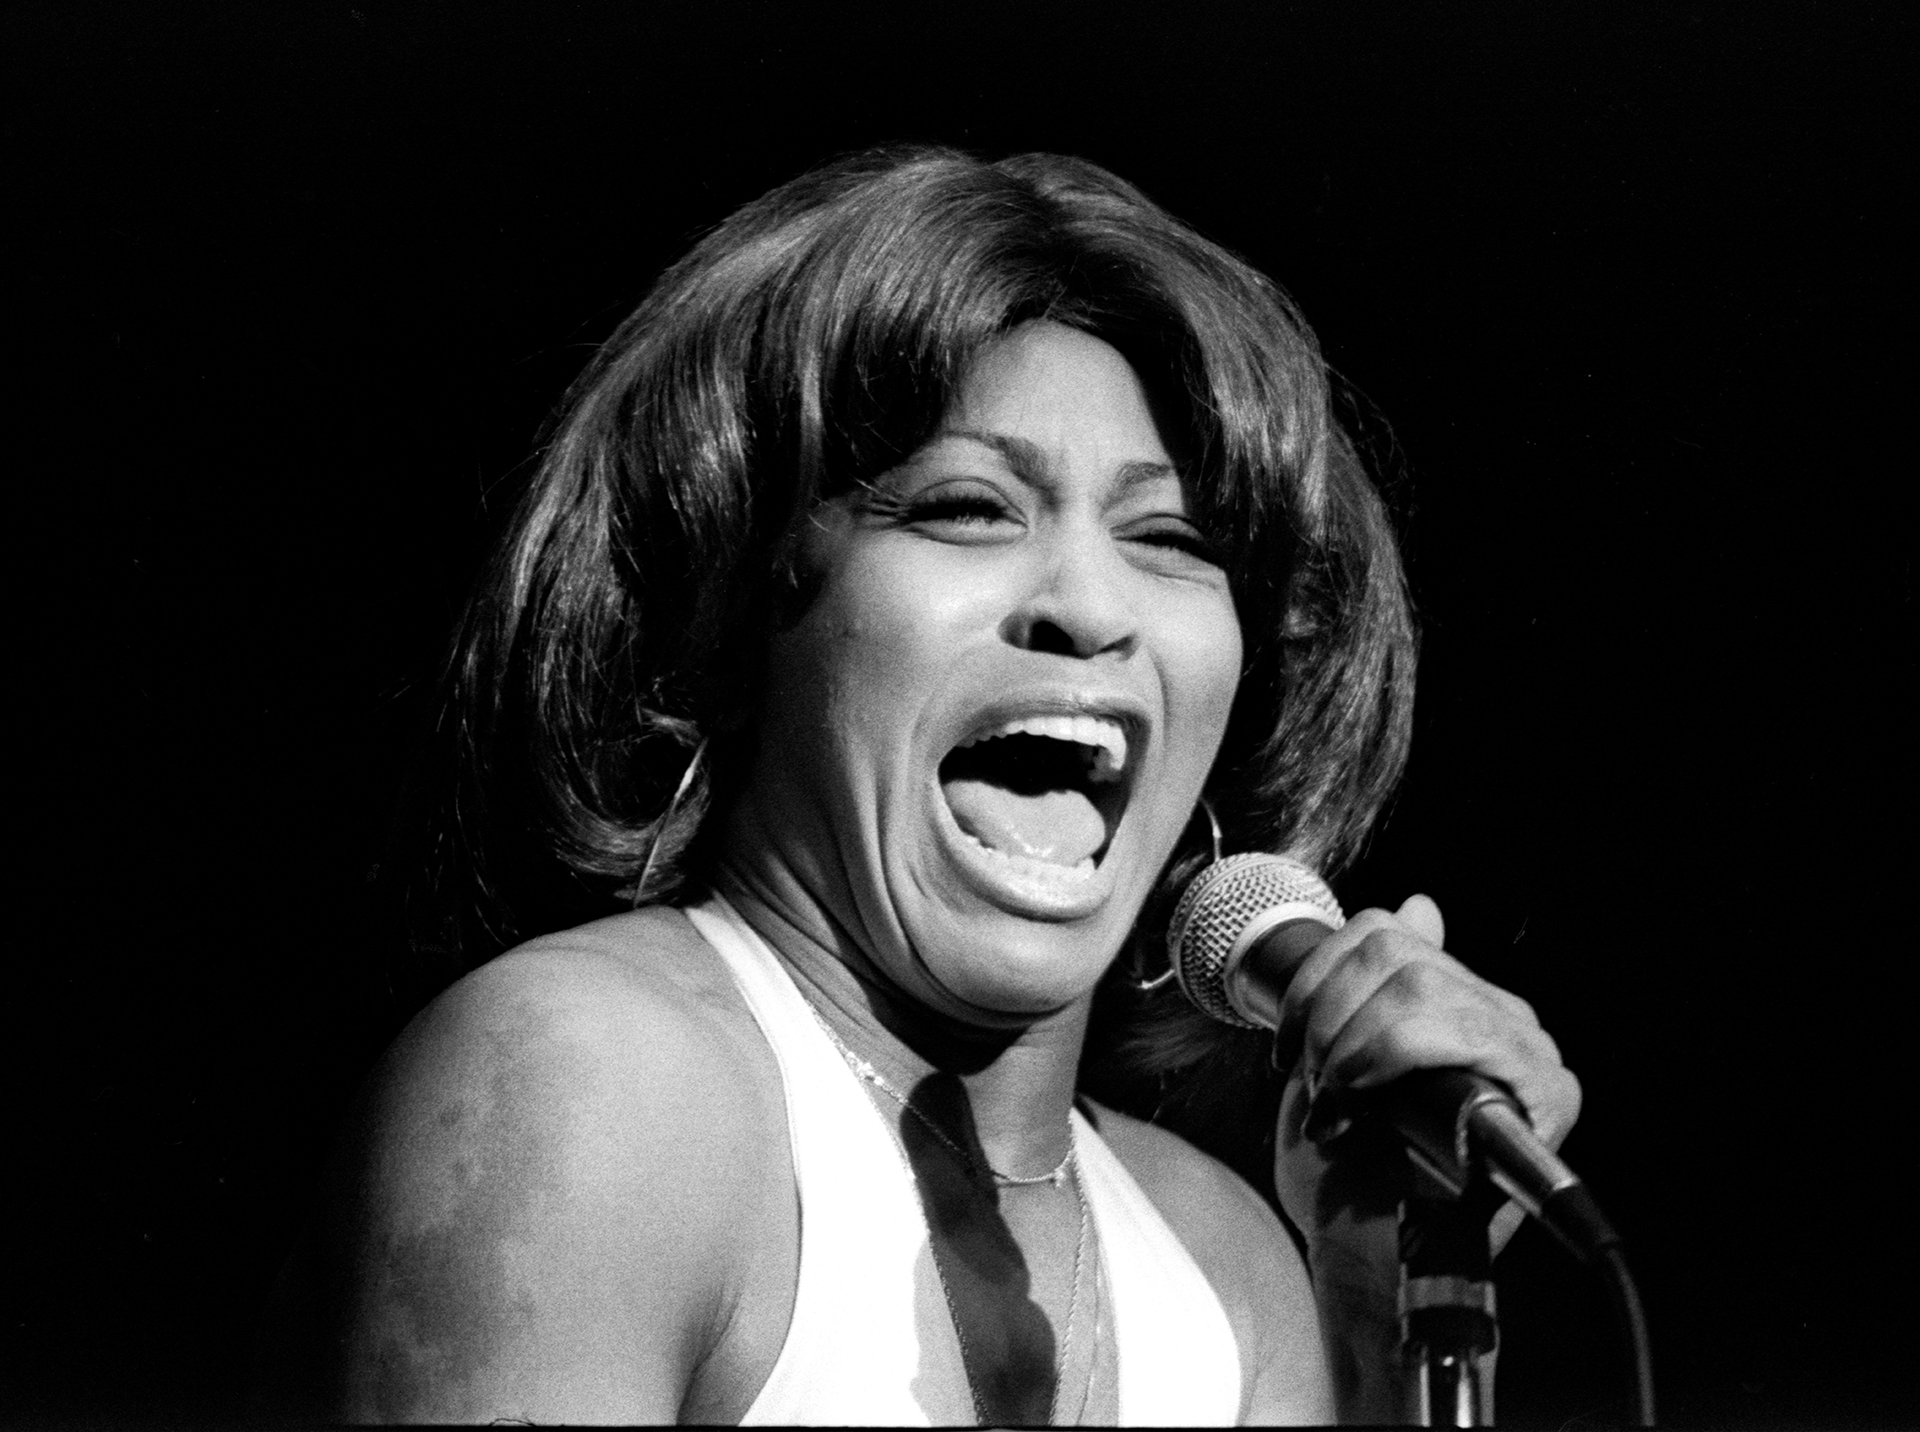 Tina Turner performs at the Cocoanut Grove nightclub in Los Angeles's Ambassador Hotel in 1975.